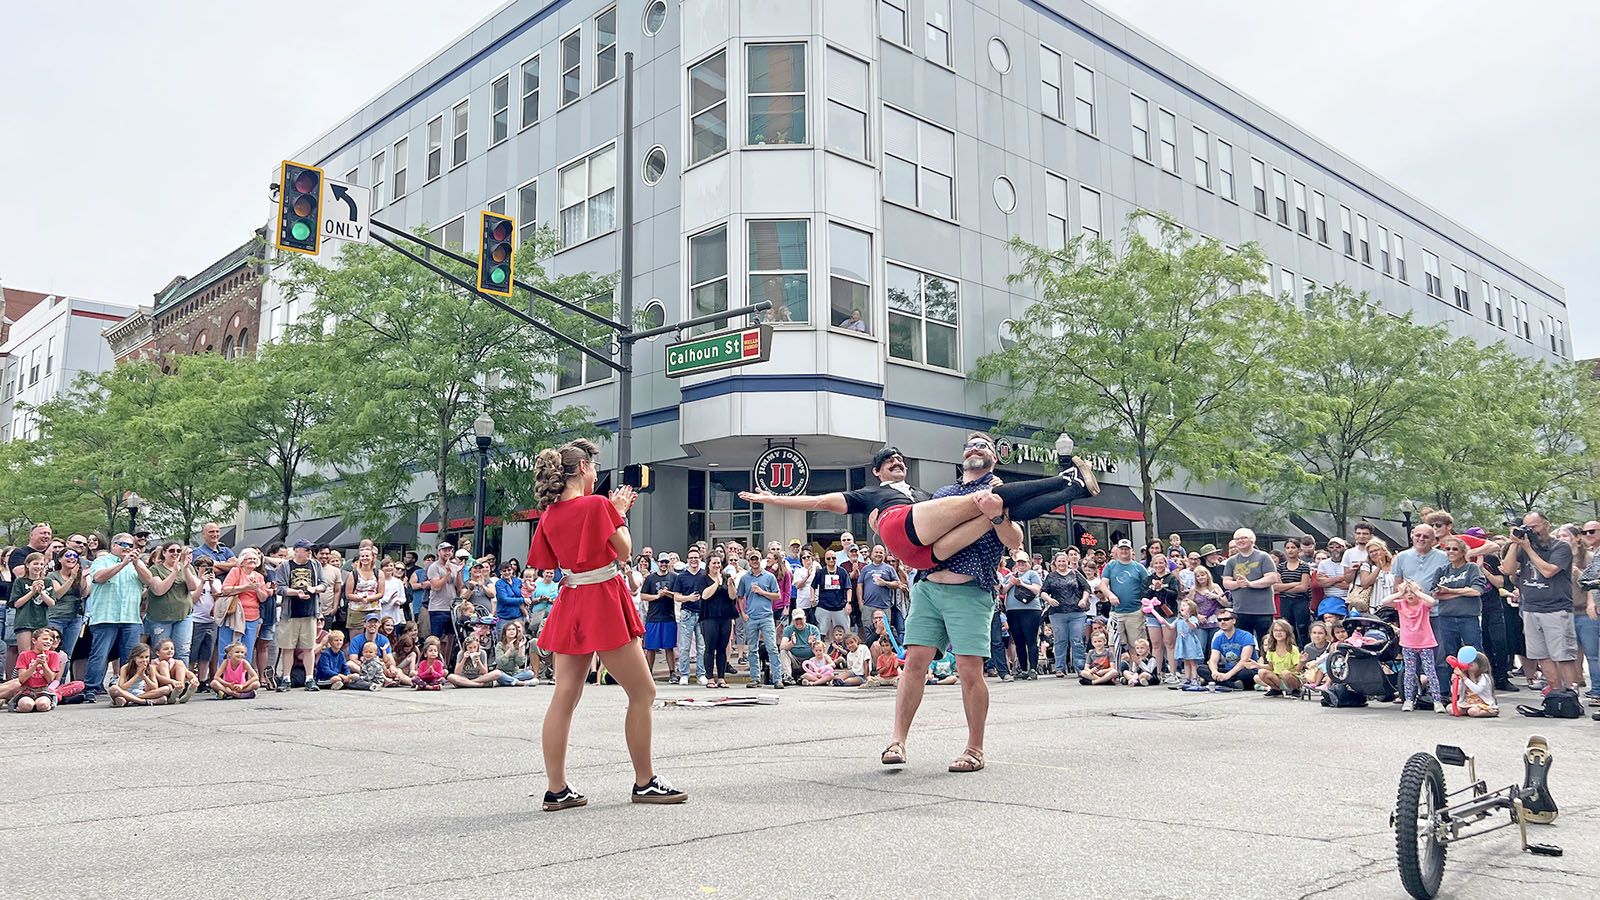 Crowds will again gather at Wayne and Calhoun streets for BuskerFest on Saturday, May 20.